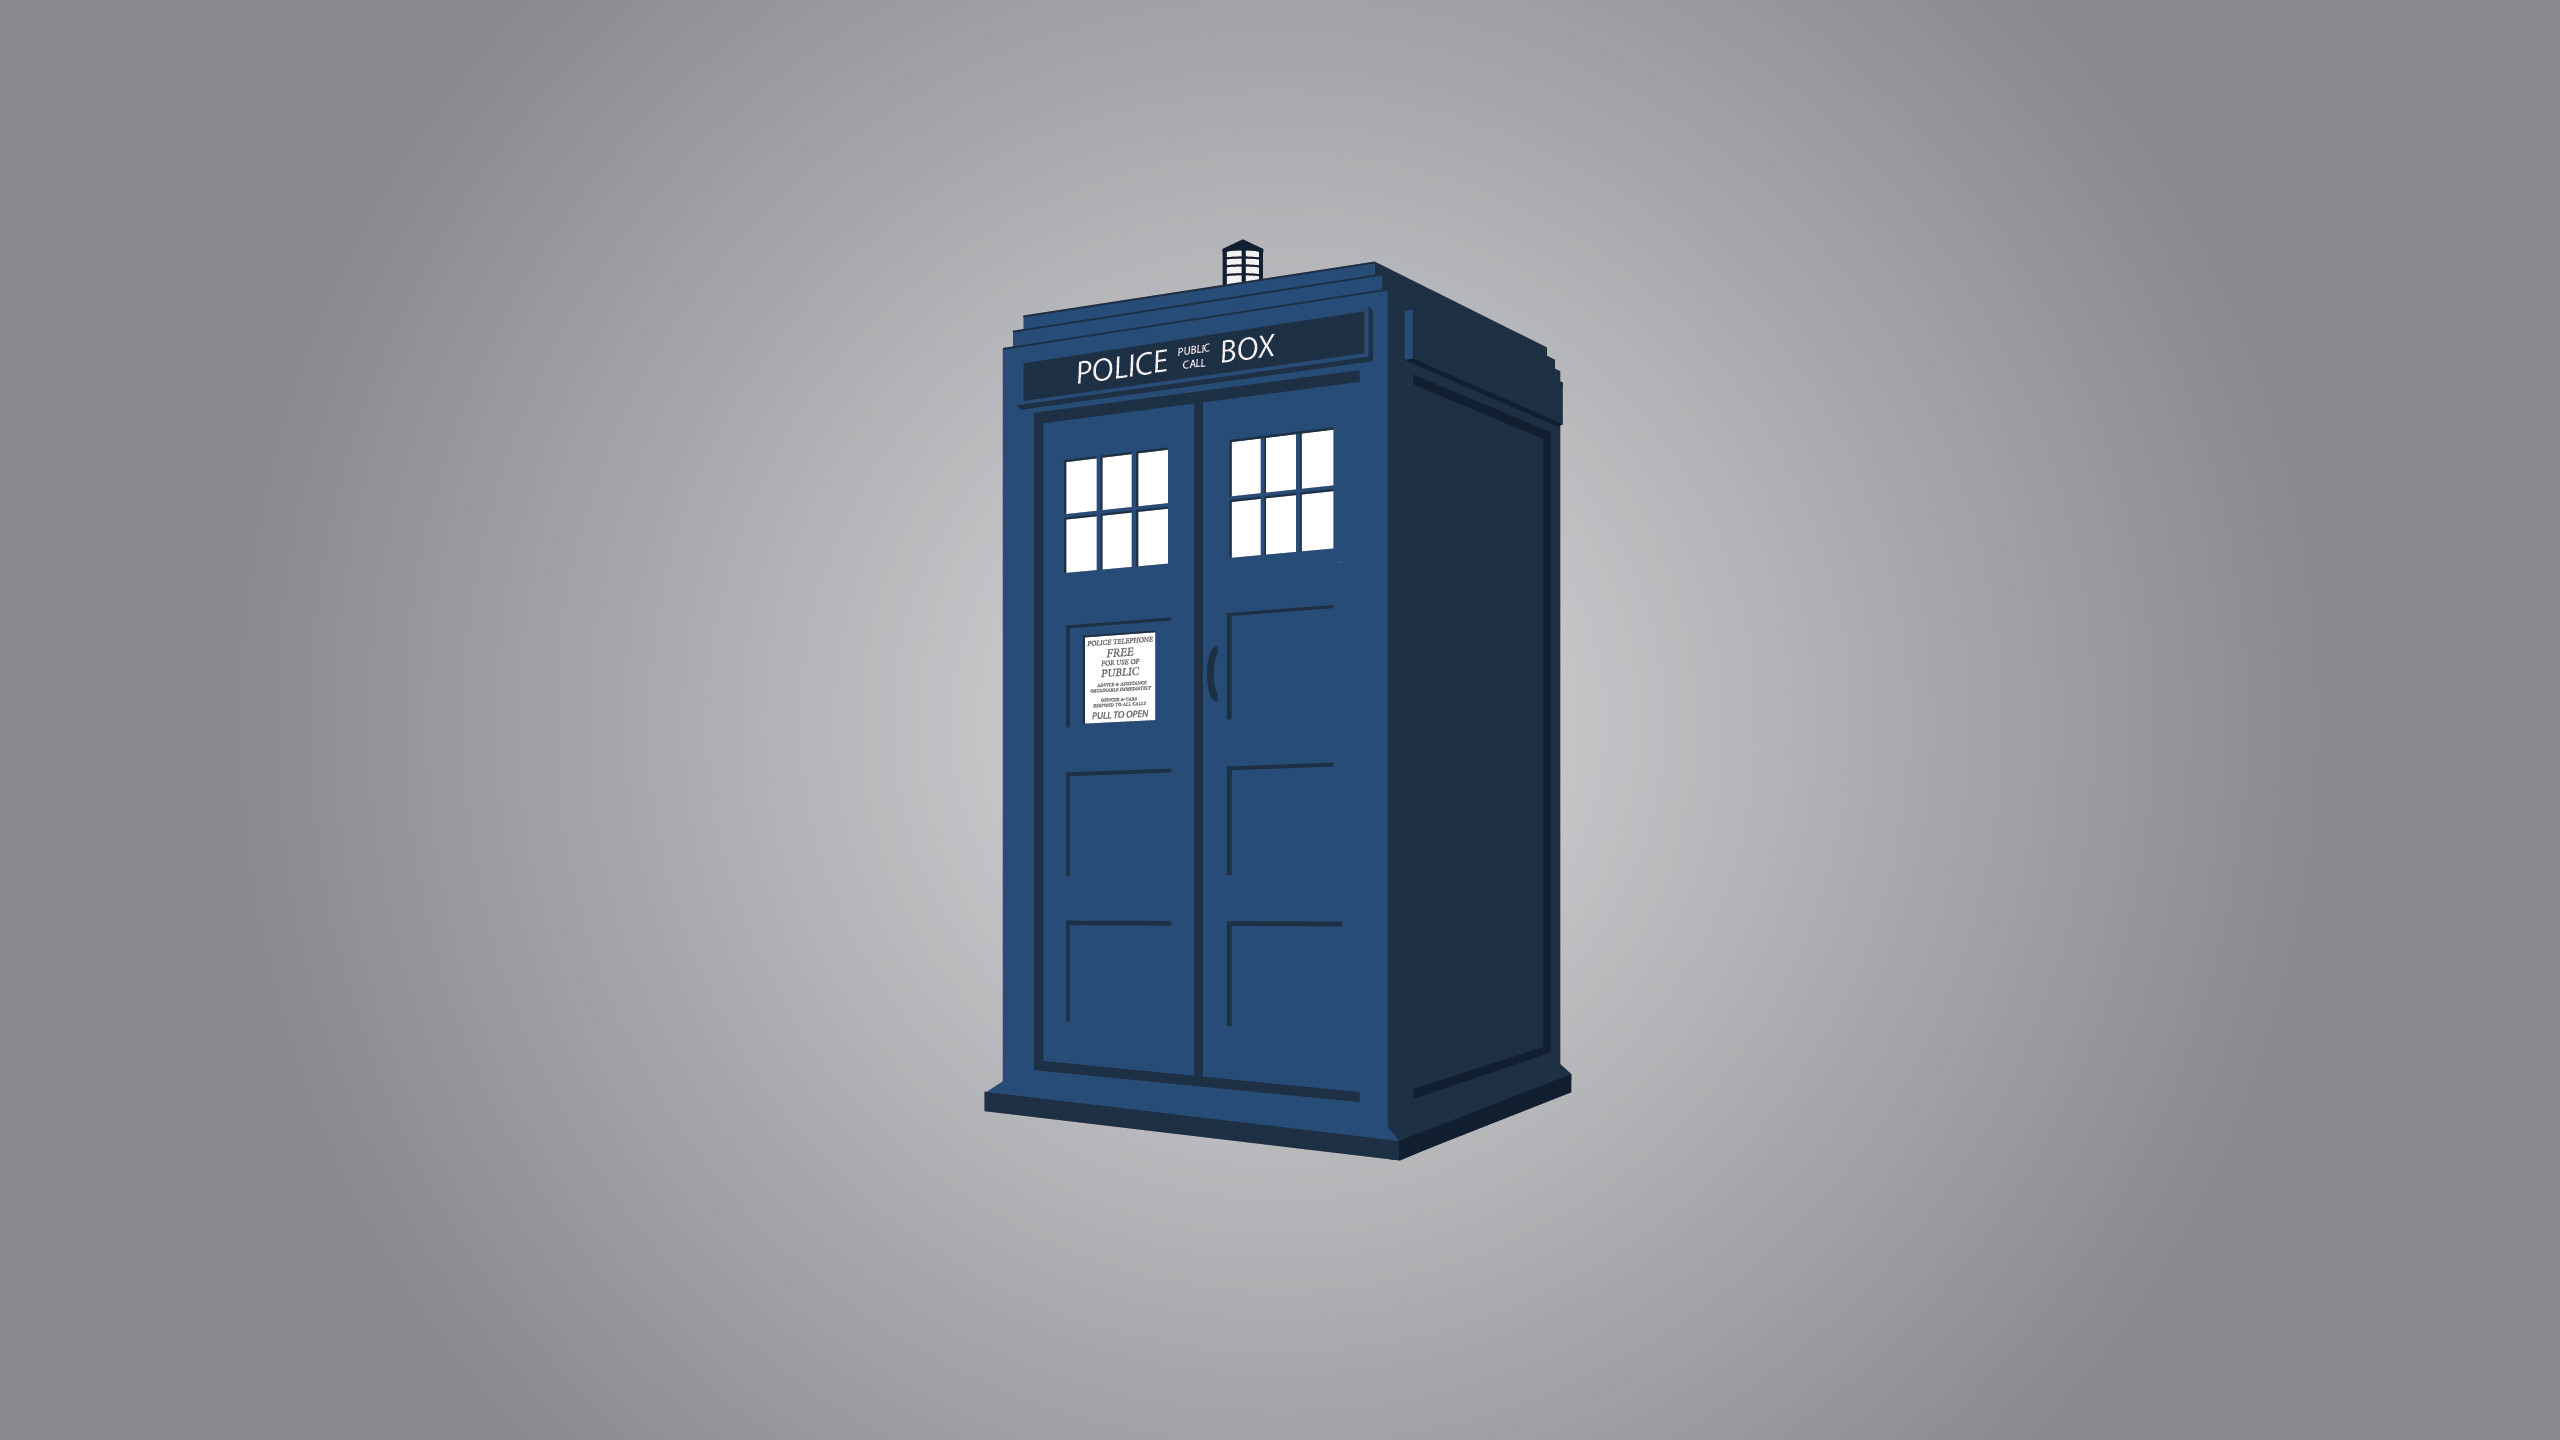 2560x1440 Free Doctor Who Background for Phone, Tablet or Desktop